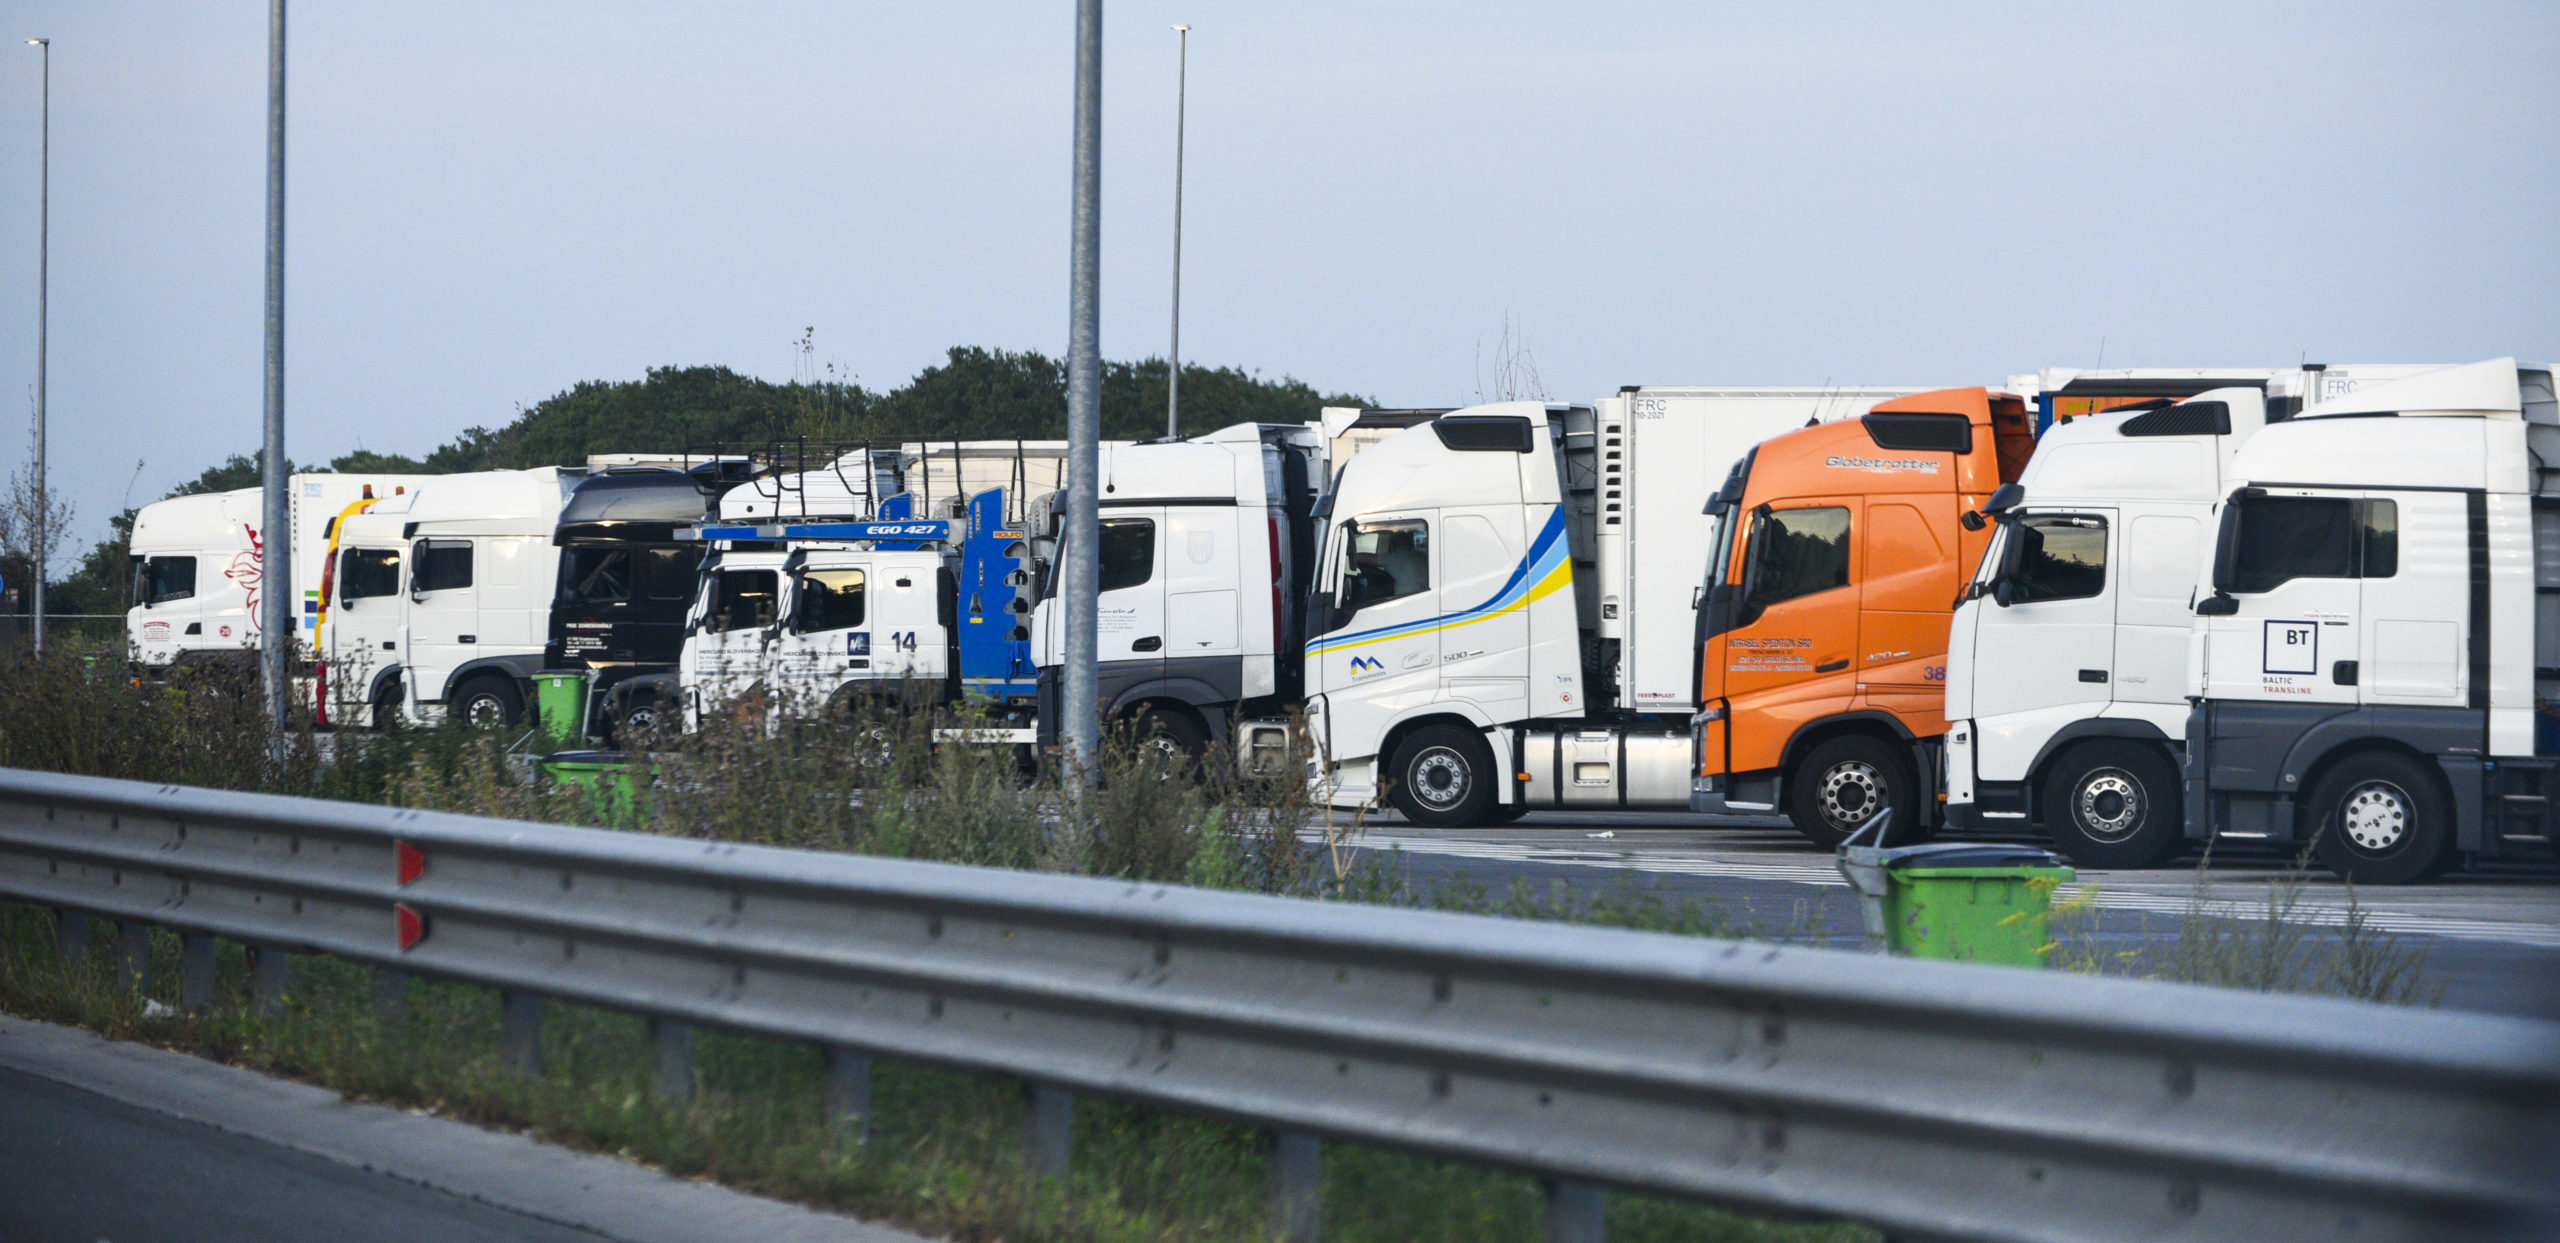 Flanders: separate highway parking lots for cars and trucks